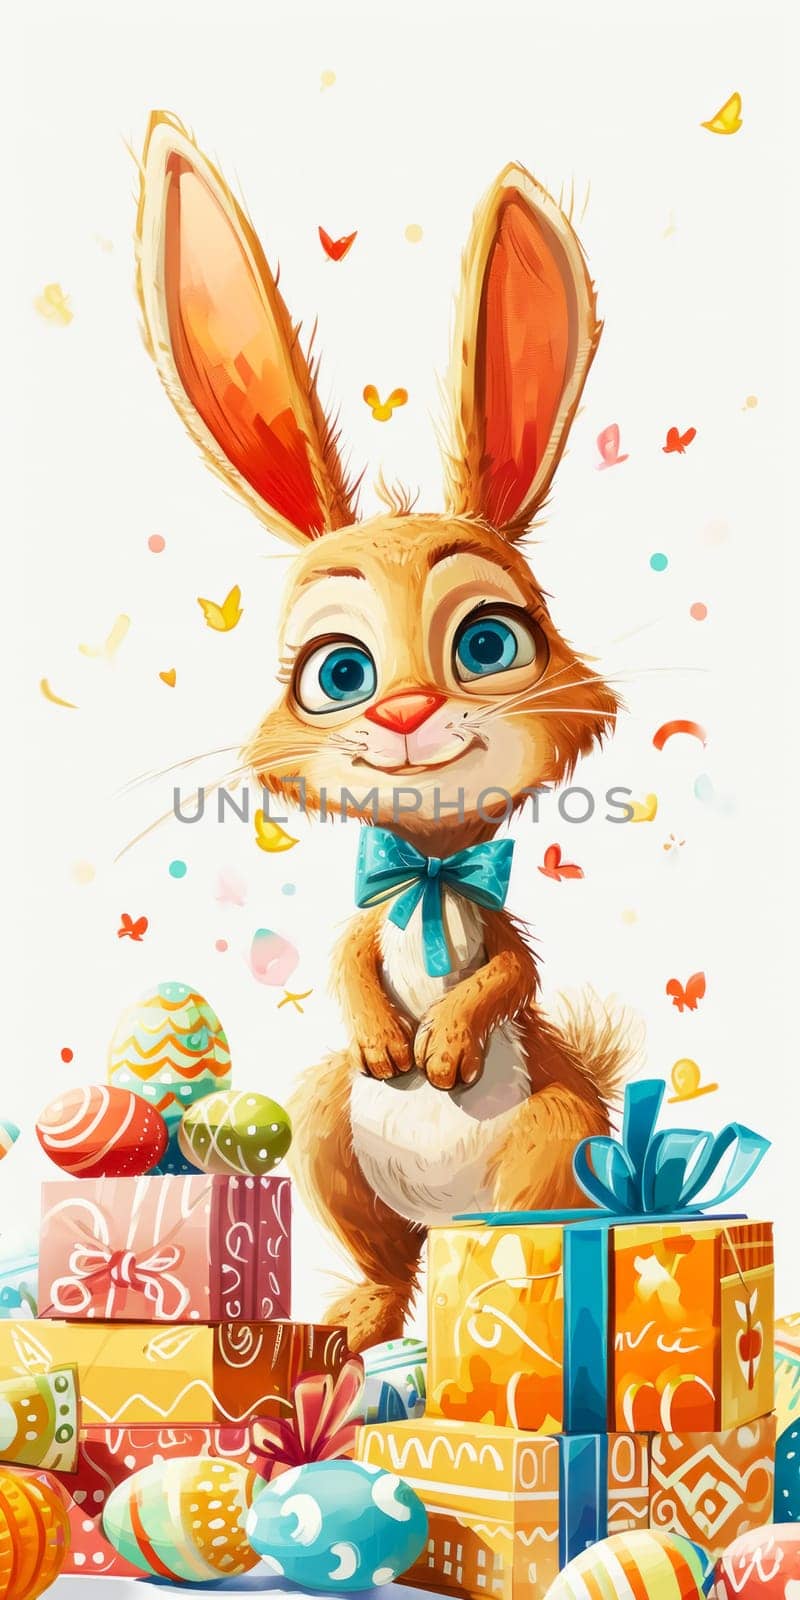 A vibrant Easter illustration displaying a joyful bunny with a bow tie, playfully holding a decorated egg among a collection of colorful Easter eggs and gifts.